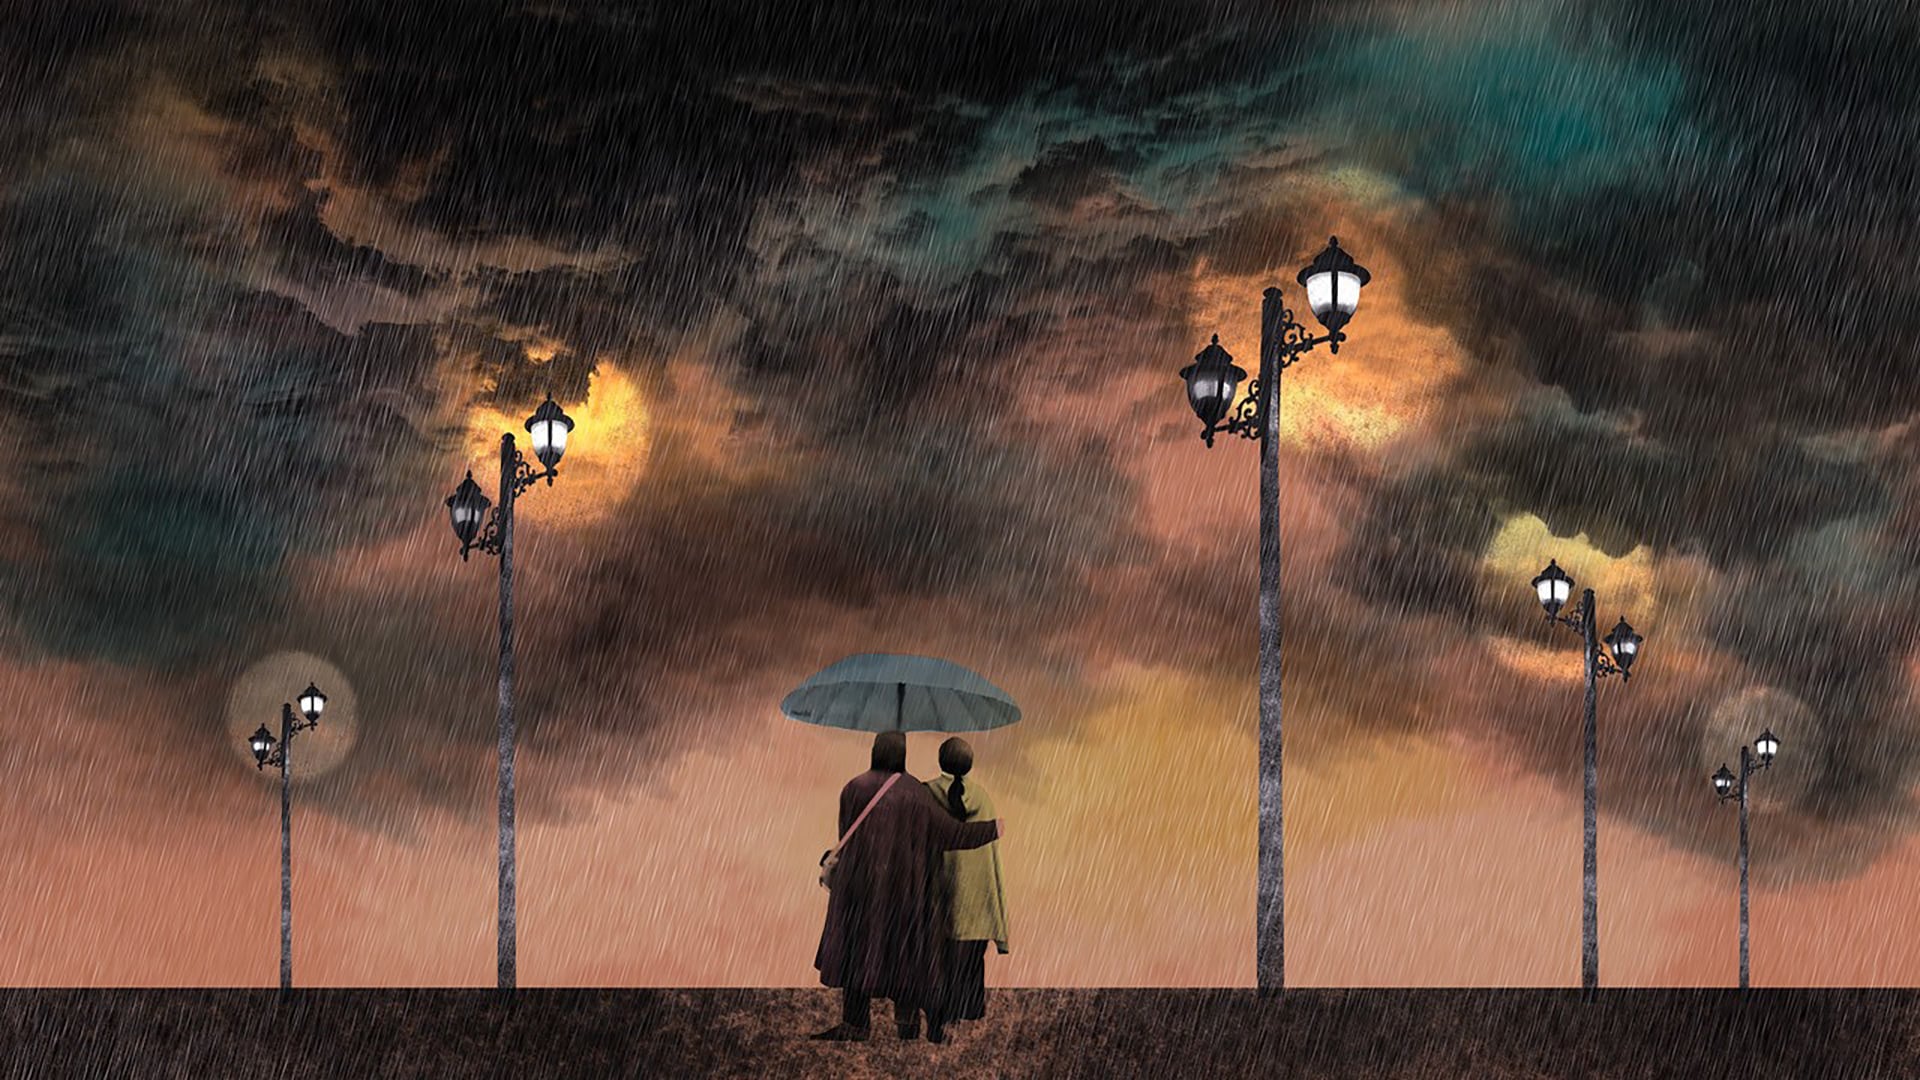 Illustration of a couple standing together under an umbrella in a rainstorm, surrounded by old fashioned street lights.